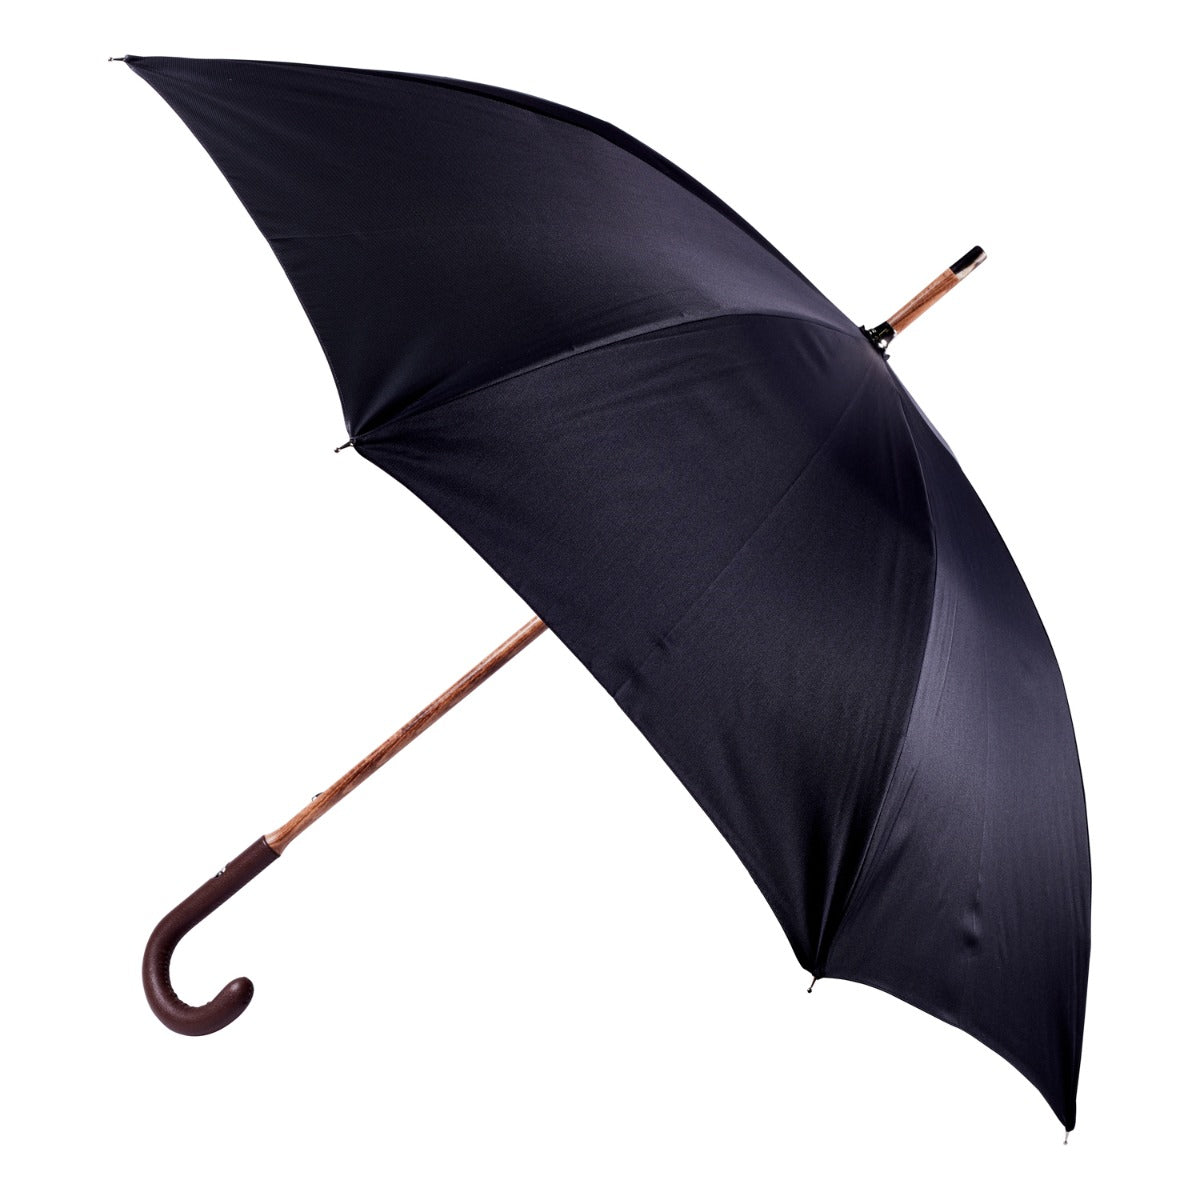 A Brown Pigskin Solid Stick Umbrella with Black Canopy from KirbyAllison.com on a white background.